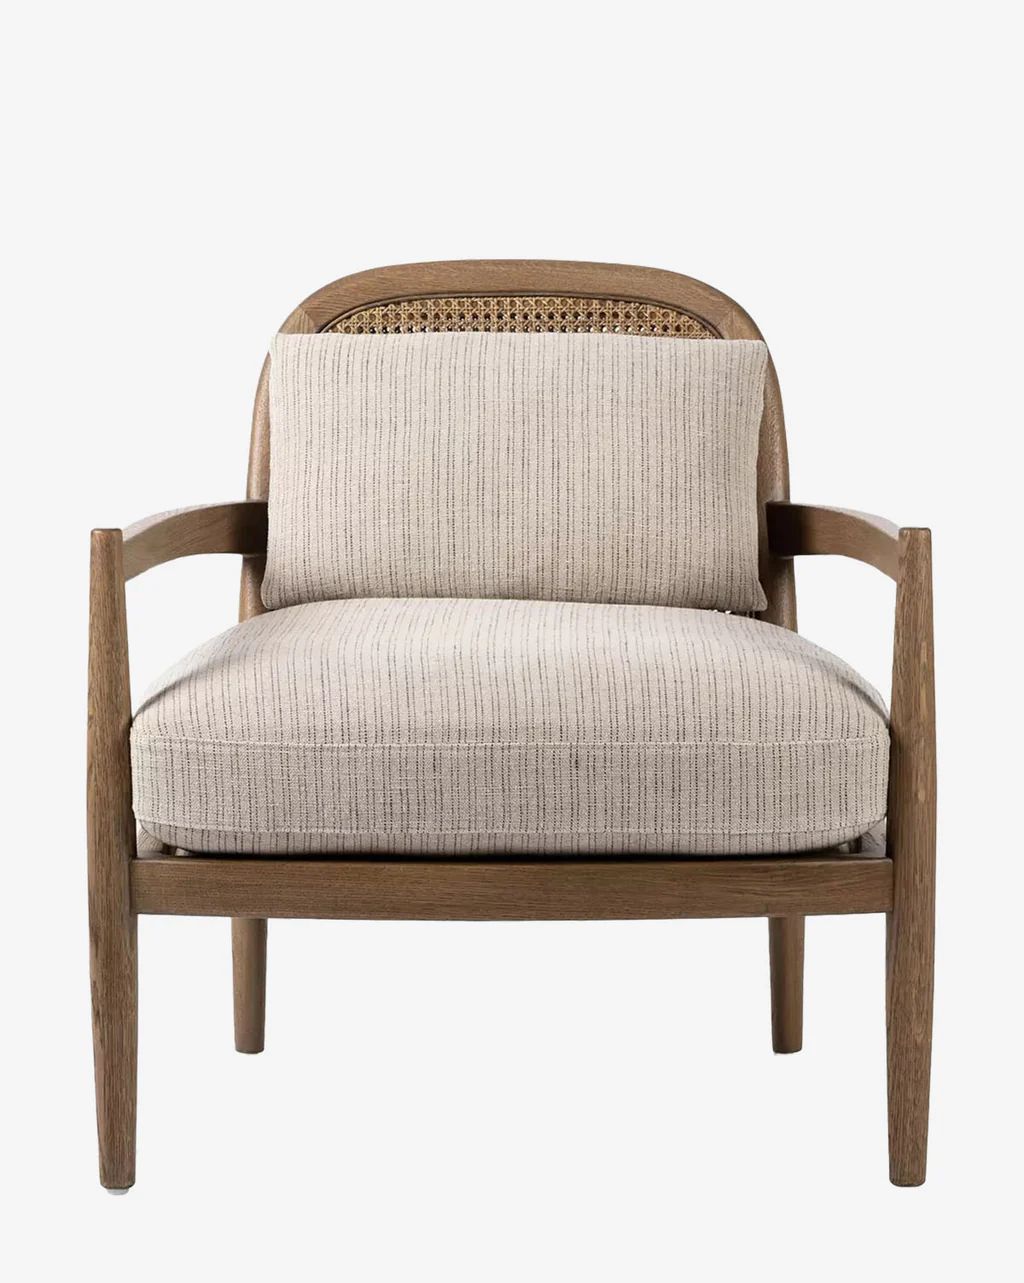 Manning Lounge Chair | McGee & Co.